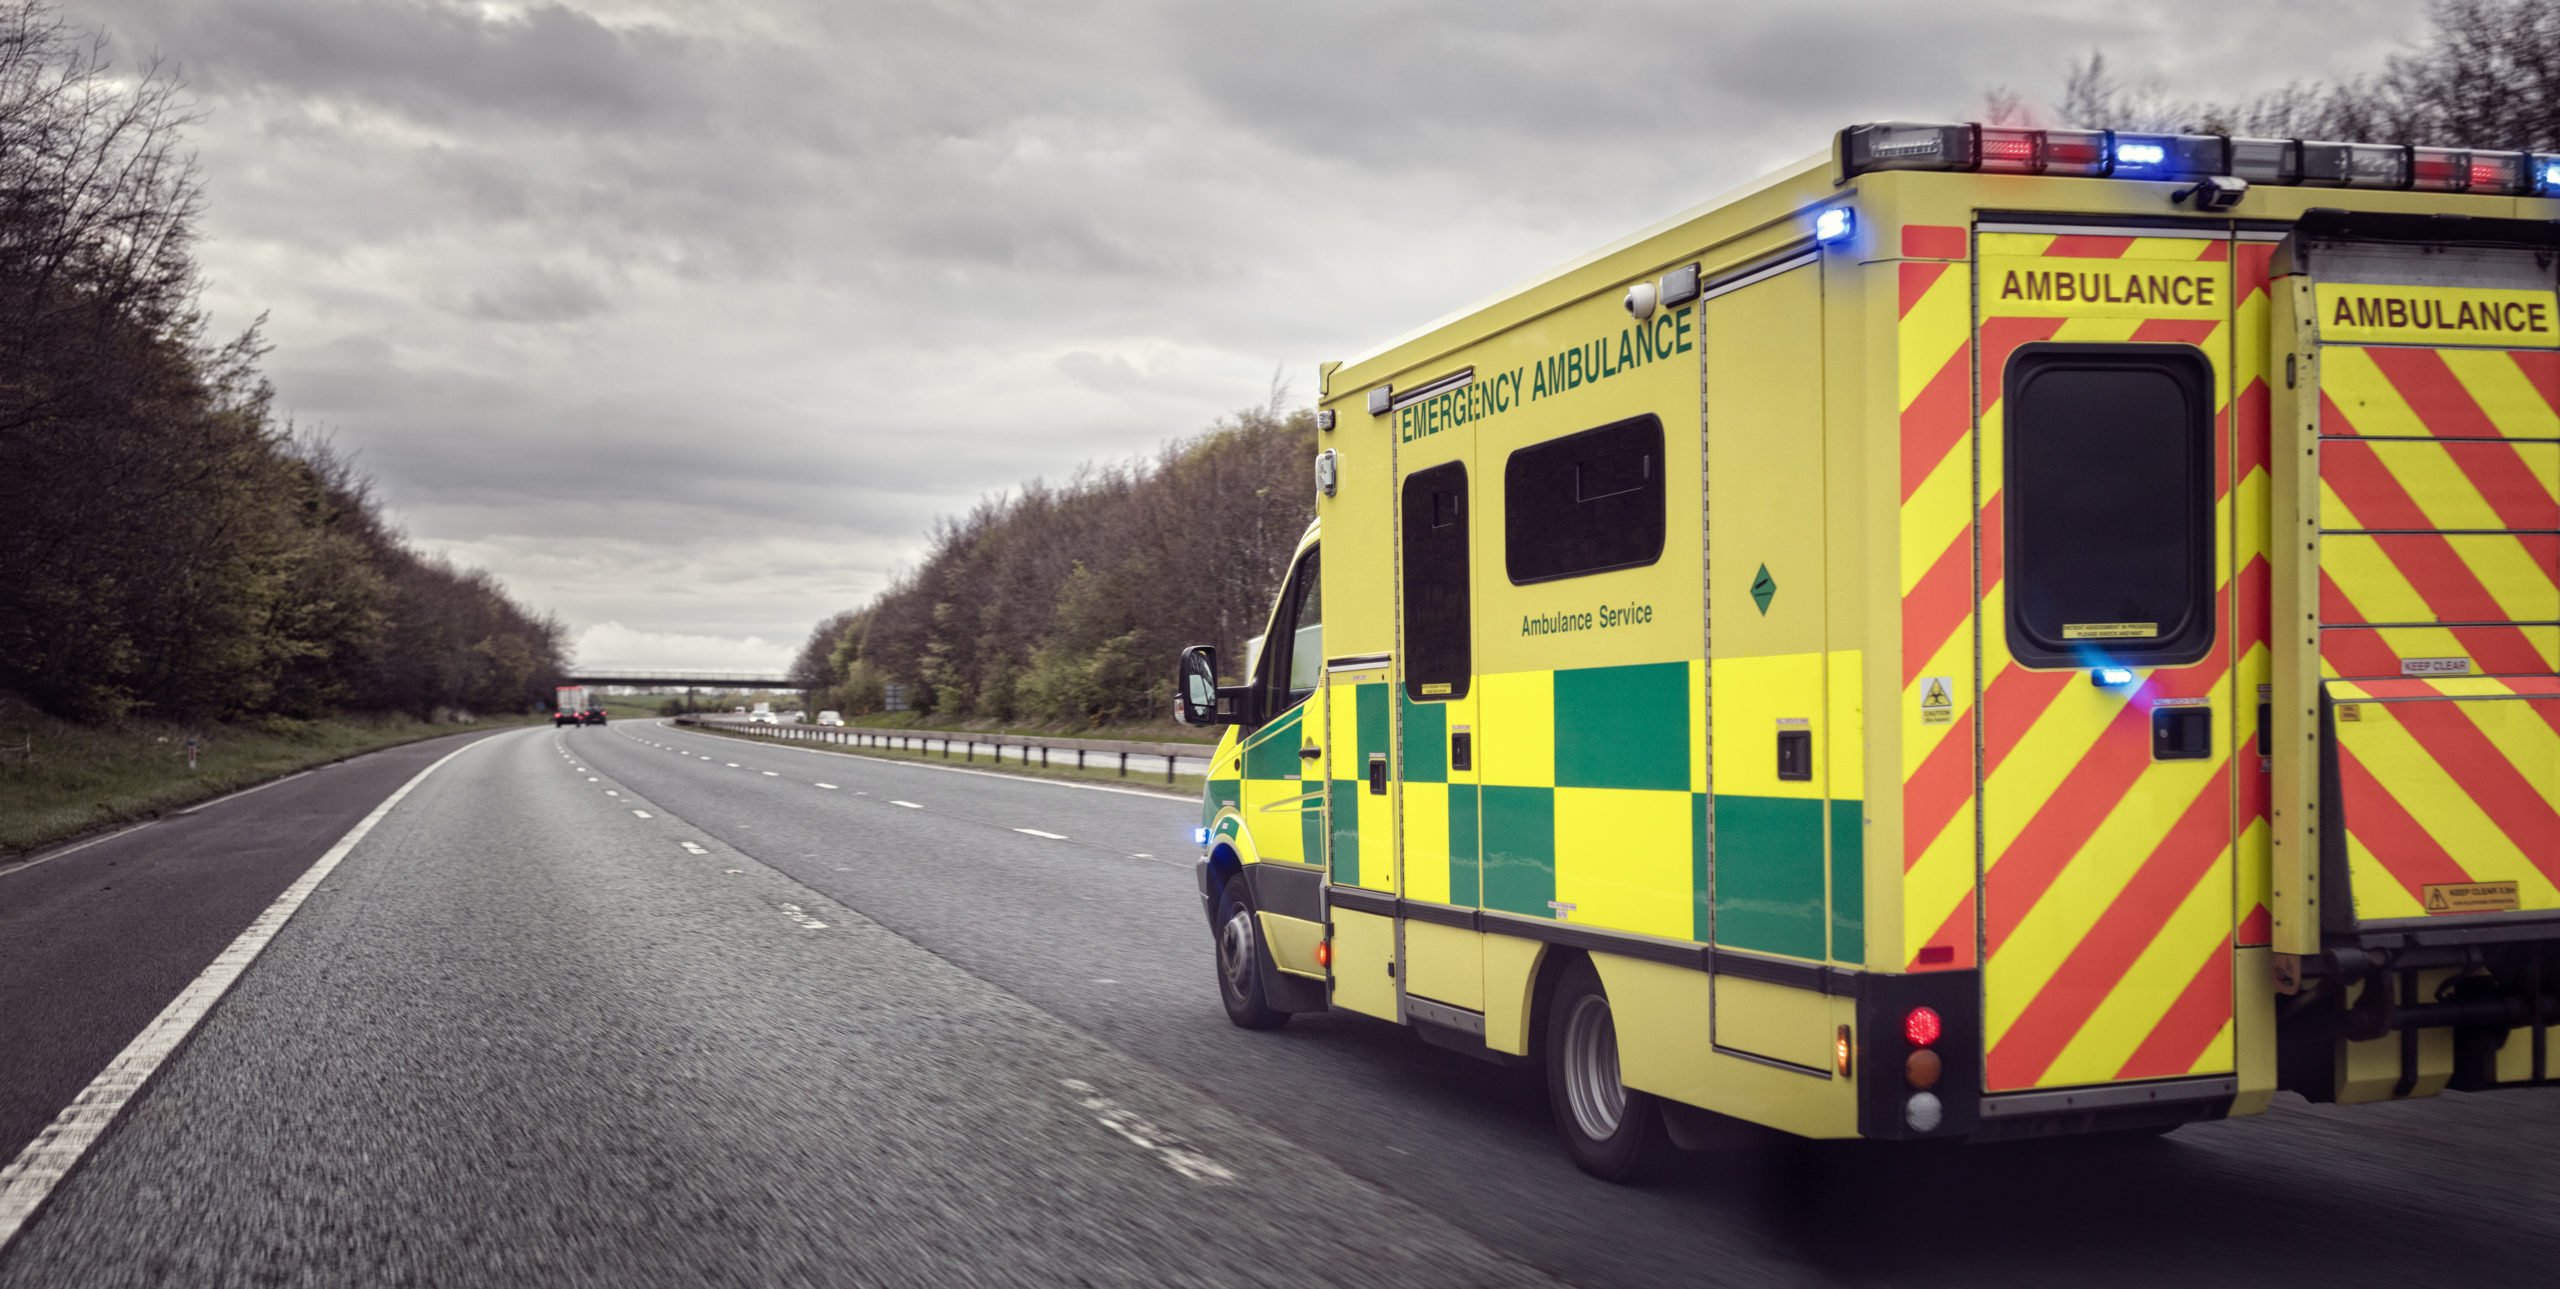 Ambulance services using Consultant Connect to improve communication - Consultant Connect